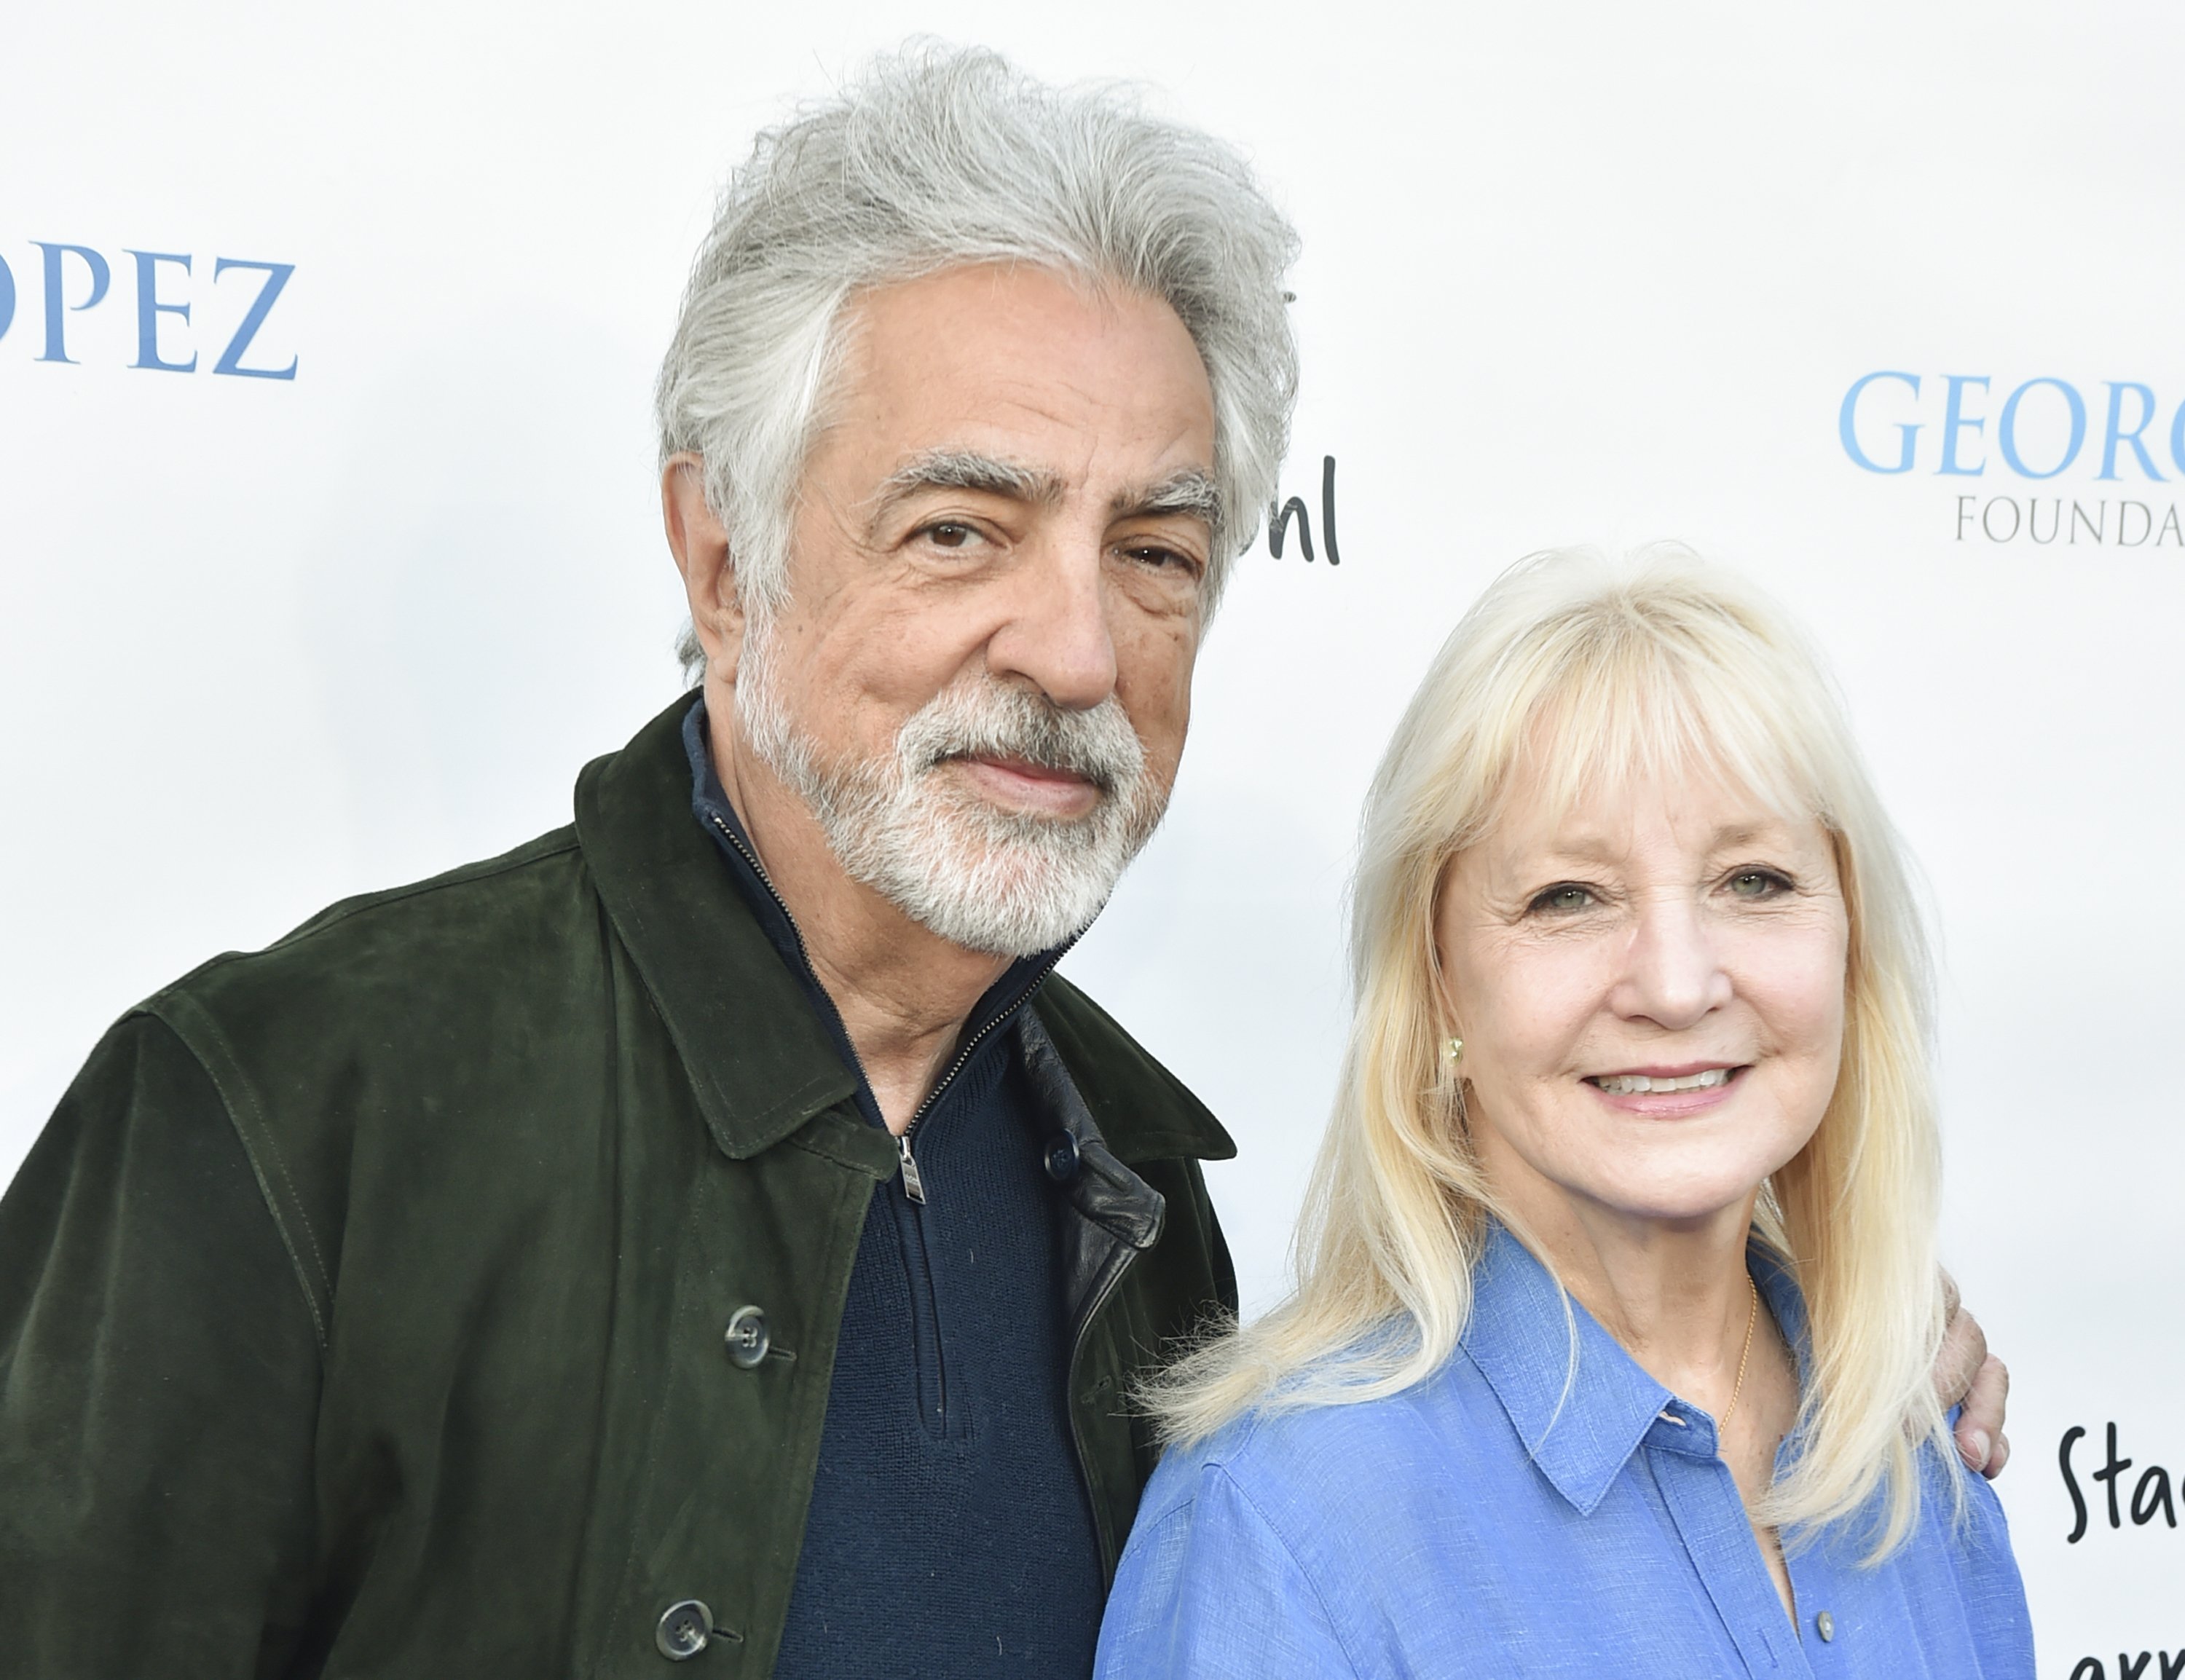 Joe Mantegna and Arlene Vrhel attend George Lopez Foundation's 15th annual celebrity golf tournament pre-party at Baltaire Restaurant on May 01, 2022 in Los Angeles, California | Source: Getty Images